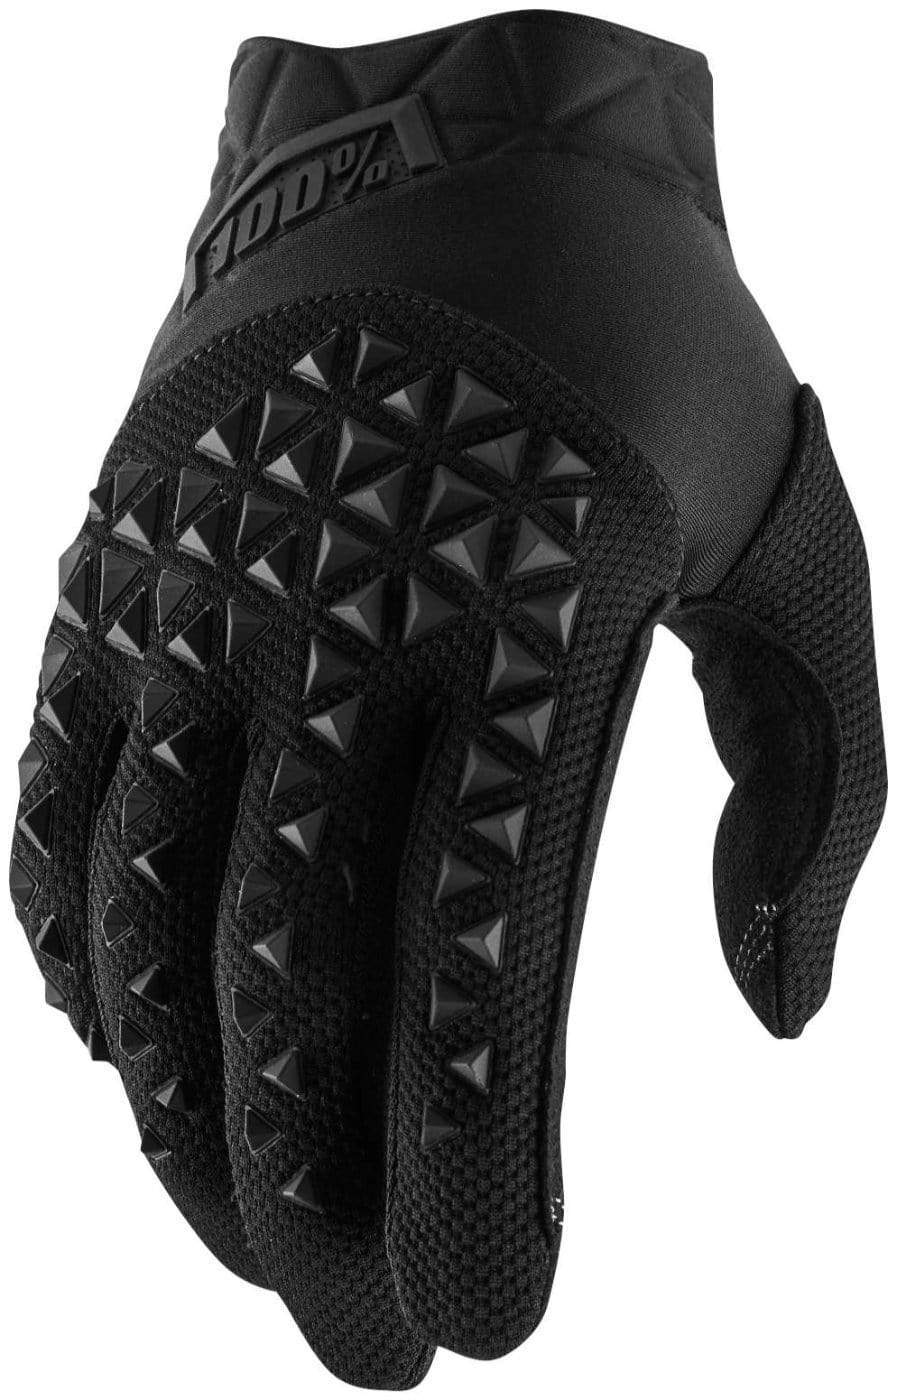 100% Apparel 100% Youth Airmatic Gloves Black/Charcoal